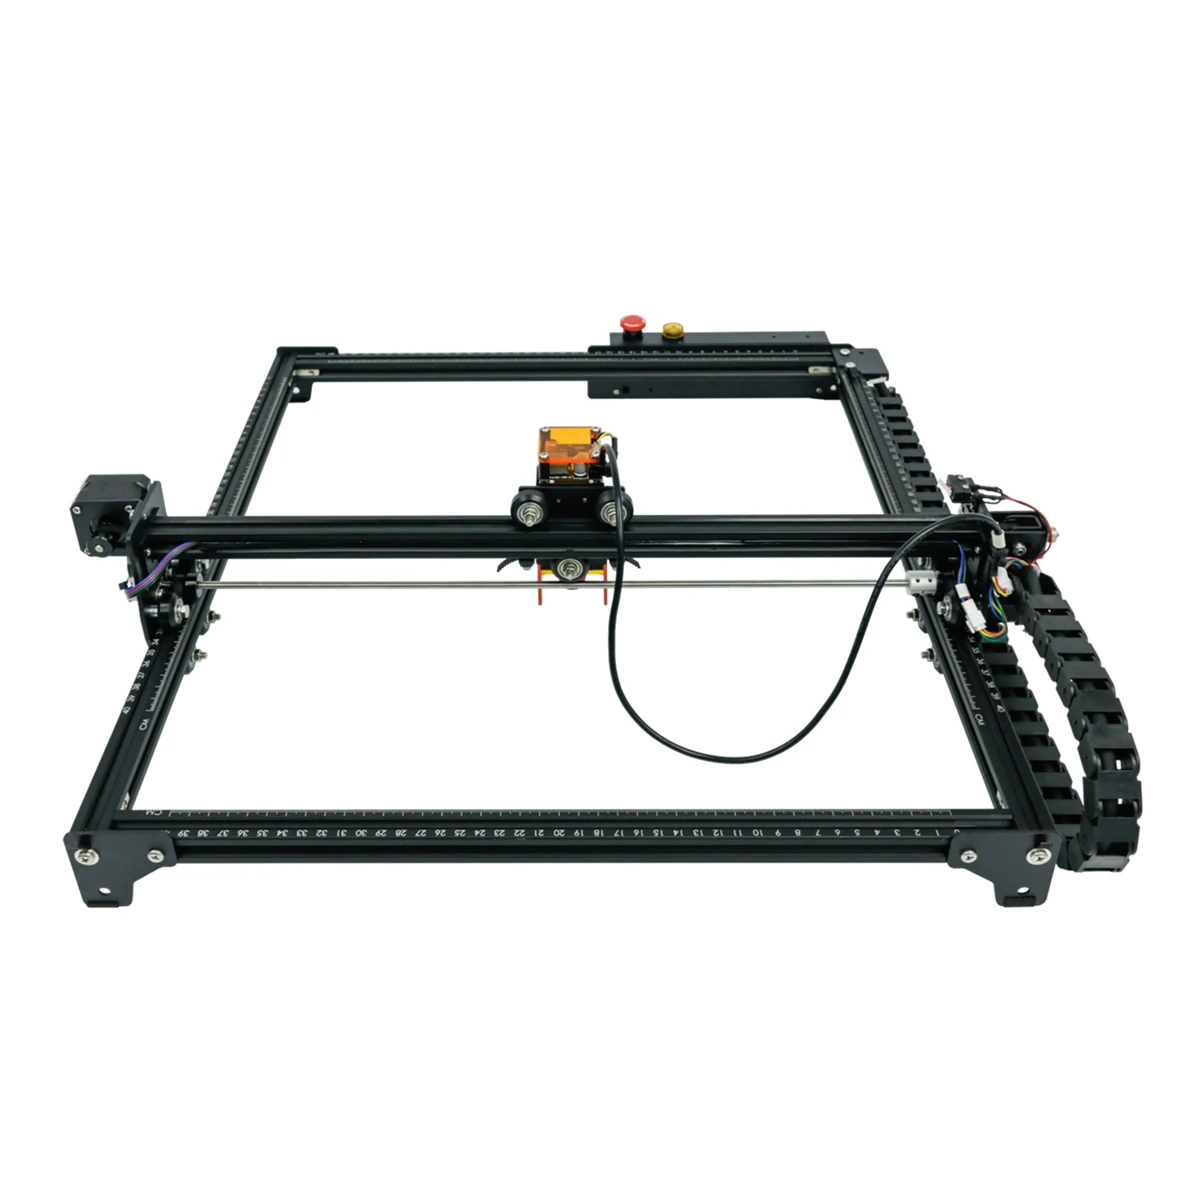 Find ORTUR Laser Master 2 Pro S2 Laser Engraving Cutting Machine Cutter 400 x 430mm Large Engraving Area Fast Speed High Precision Laser Engraver for Sale on Gipsybee.com